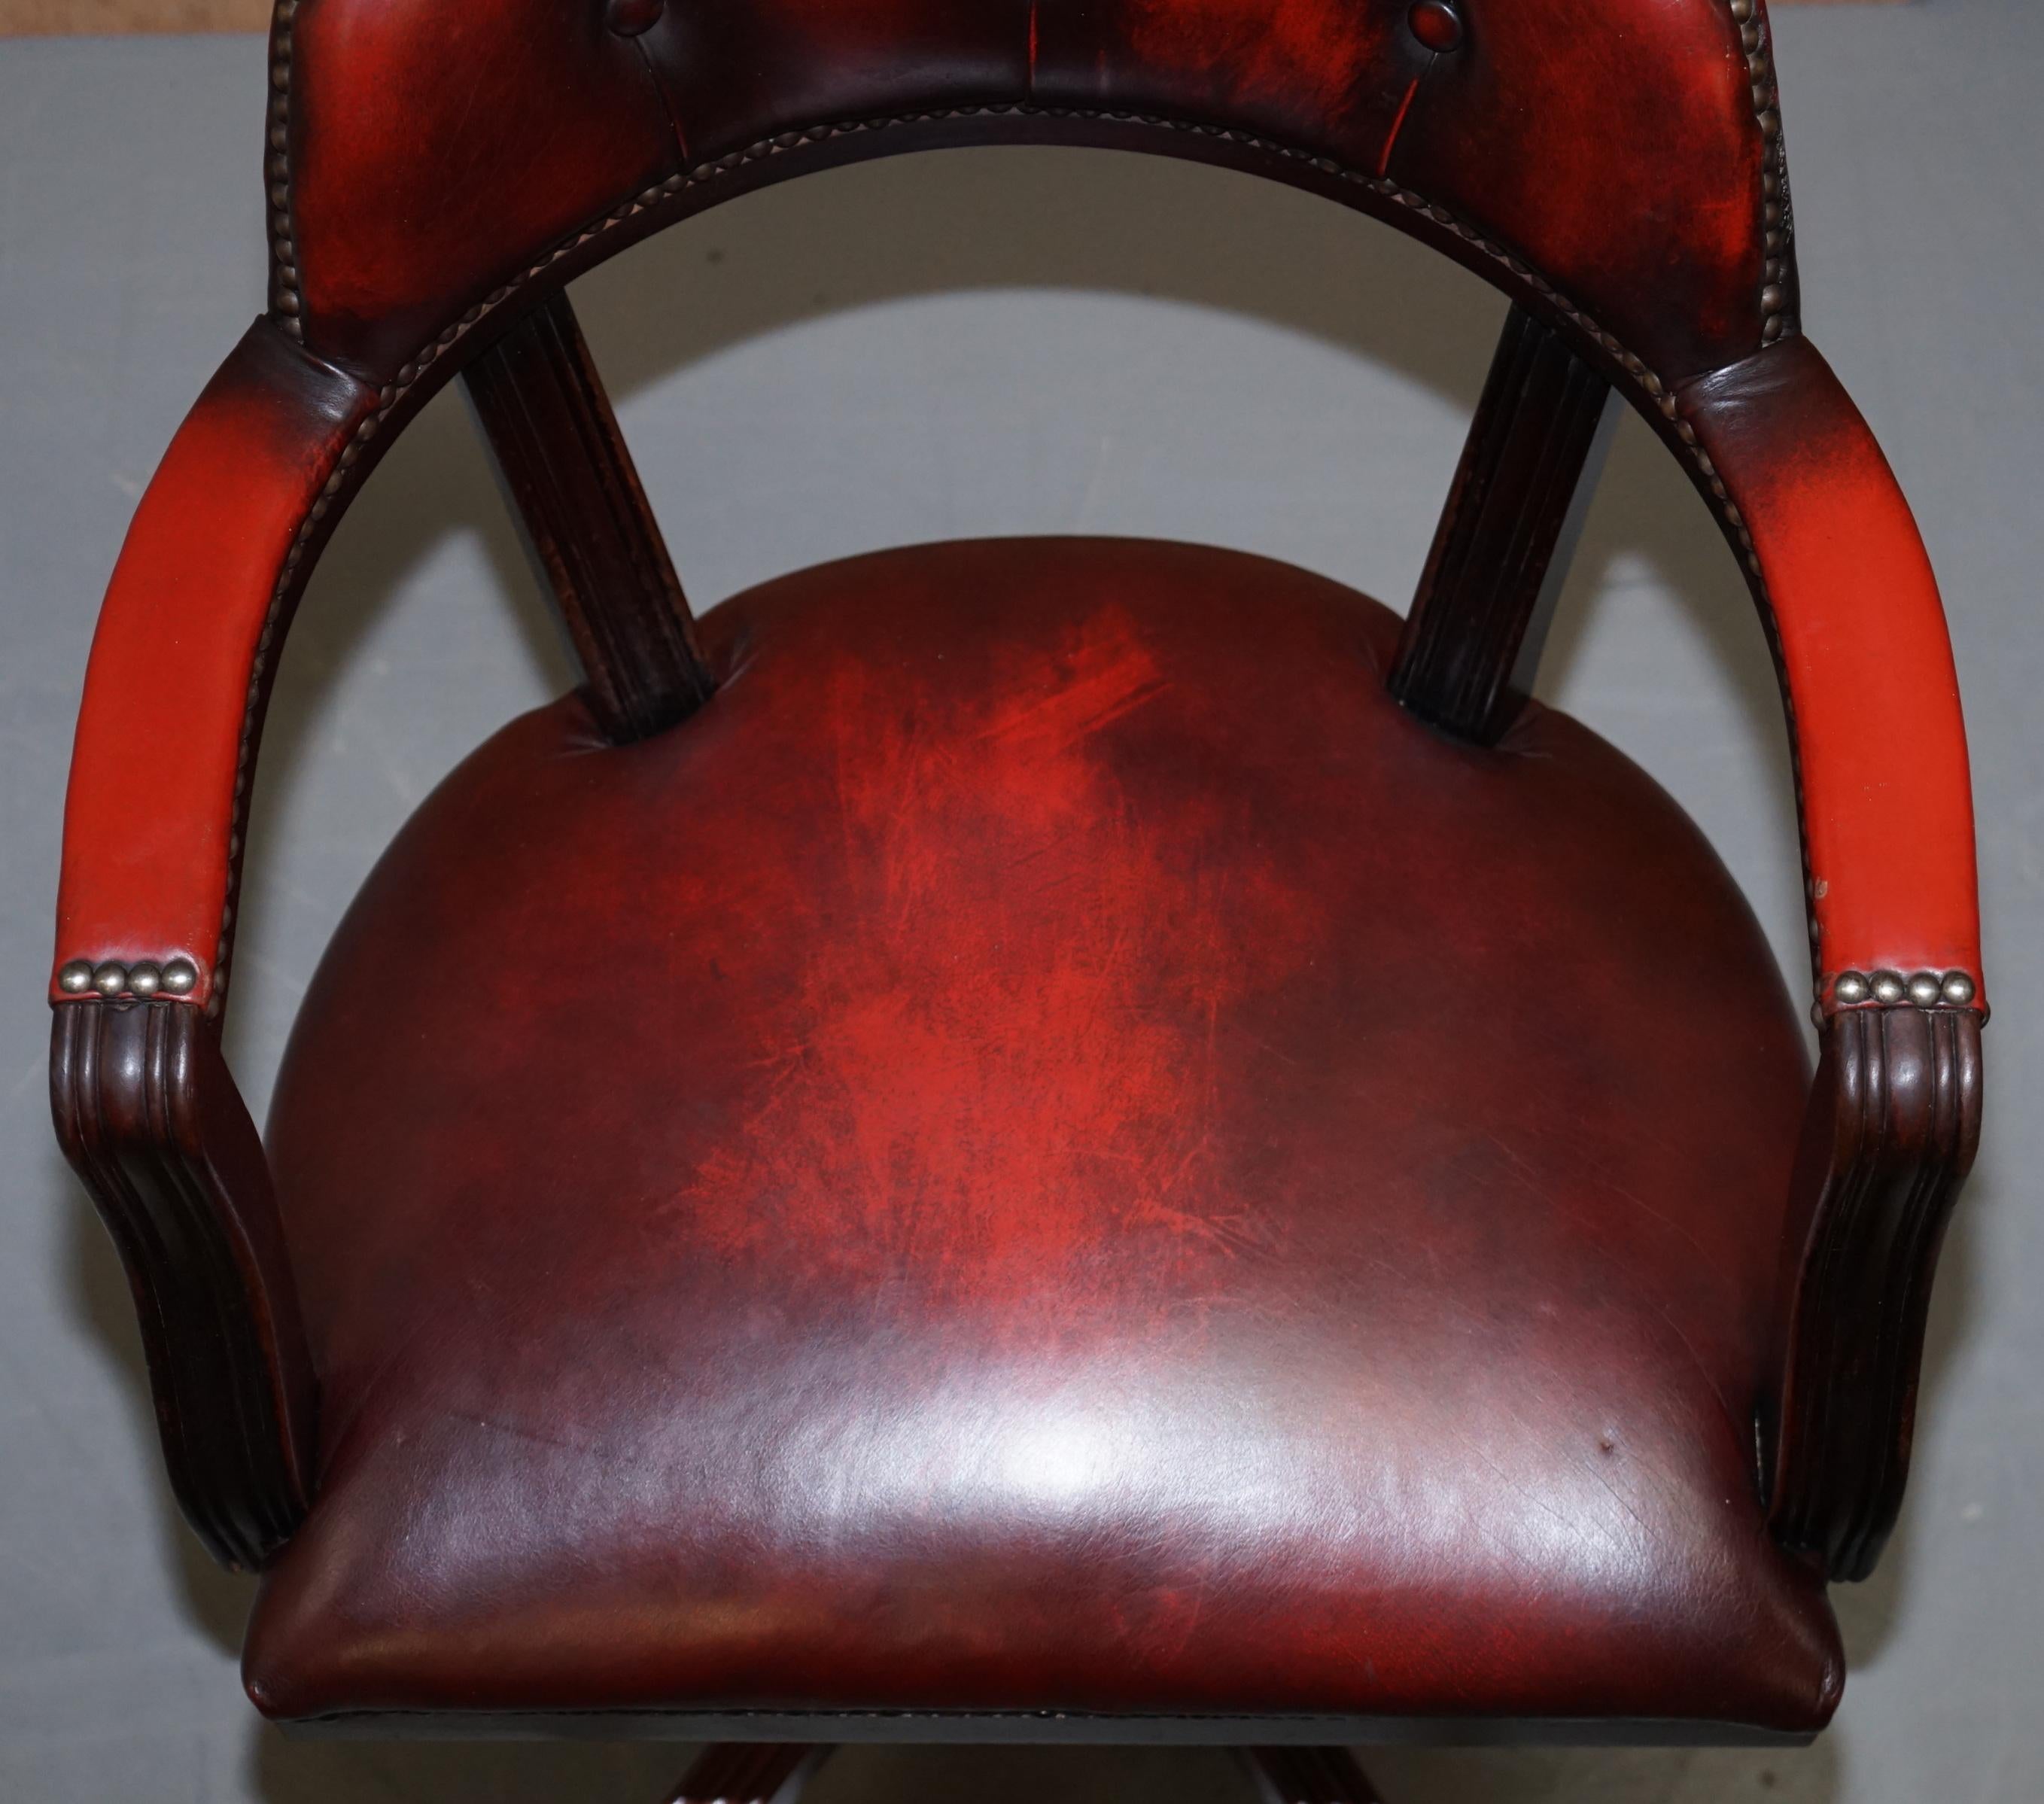 oxblood office chair